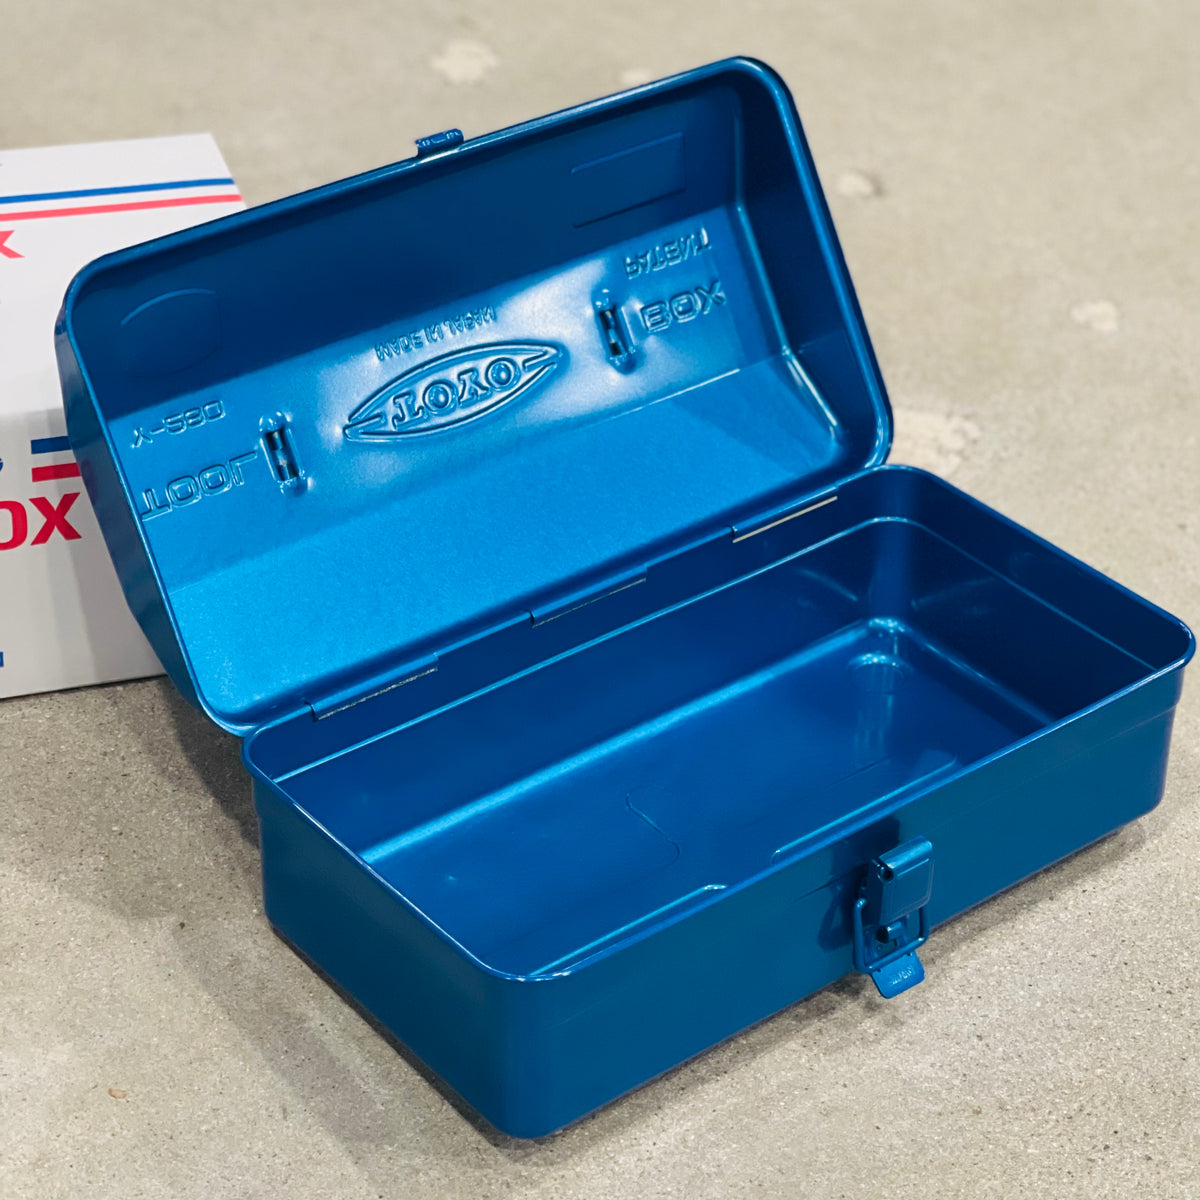 AMEICO - Official US Distributor of Toyo - Steel Toolbox Y-280